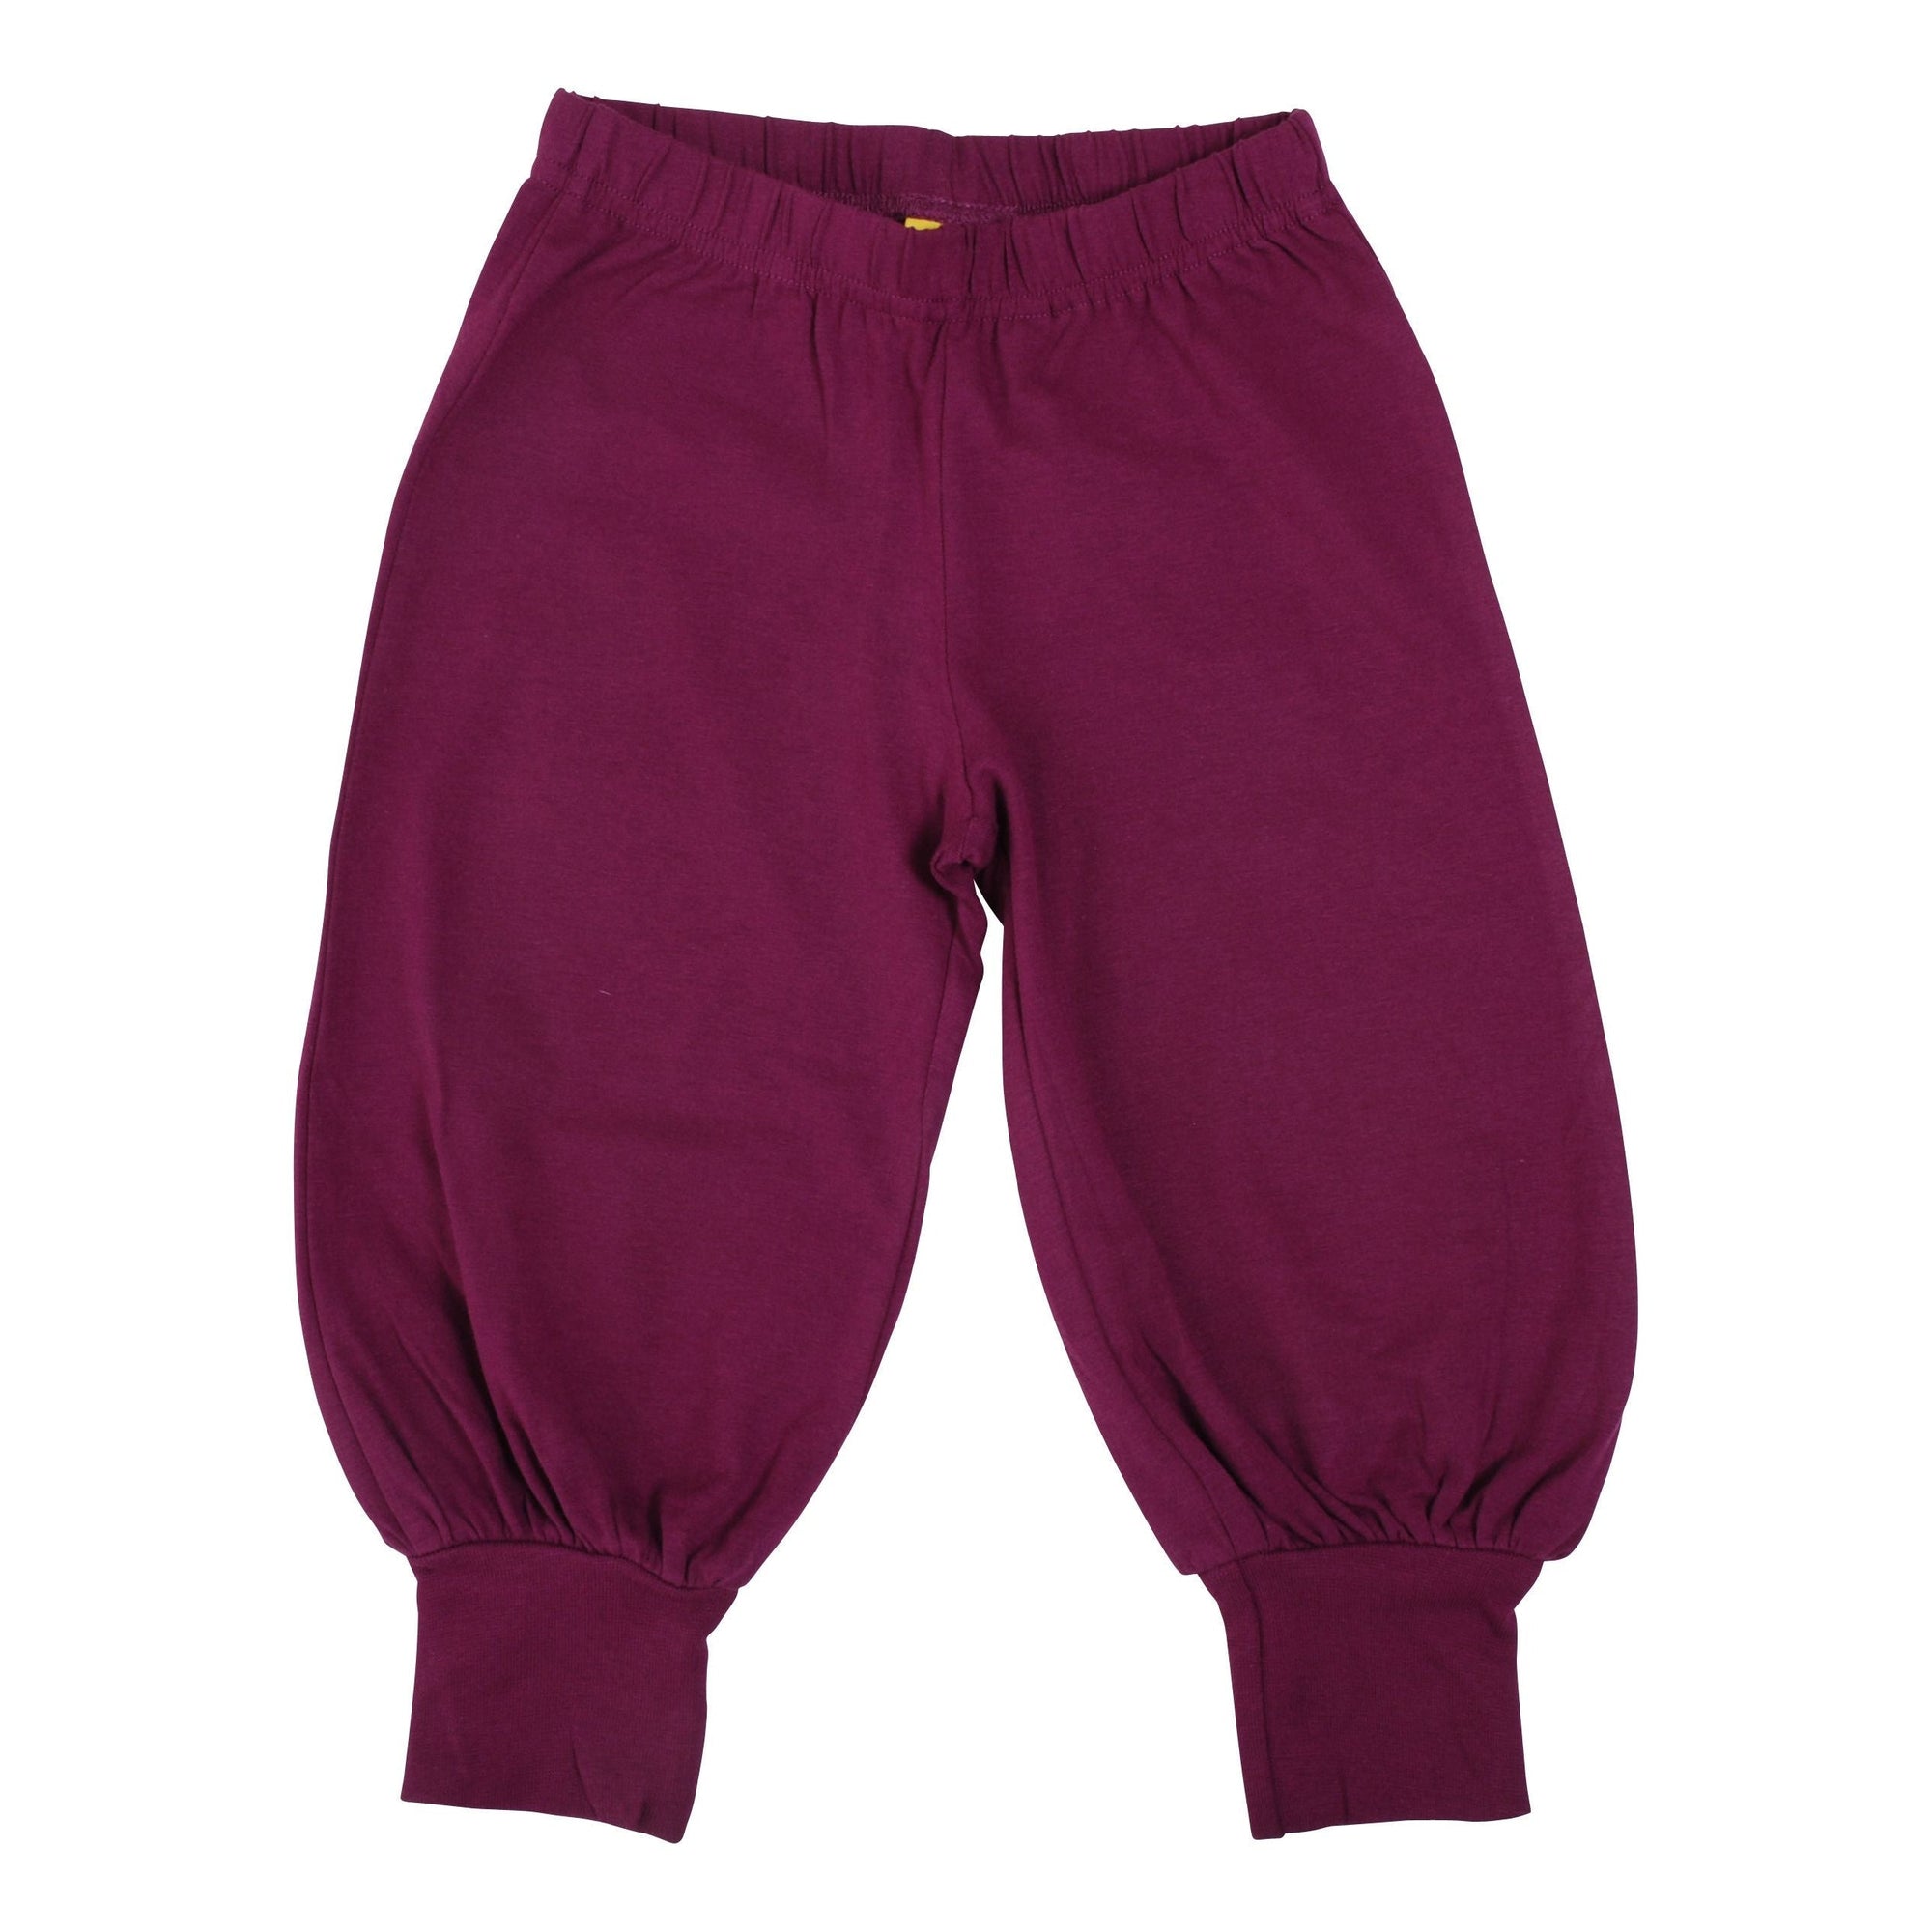 Phlox Baggy Pants - 2 Left Size 2-4 & 12-14 years-More Than A Fling-Modern Rascals